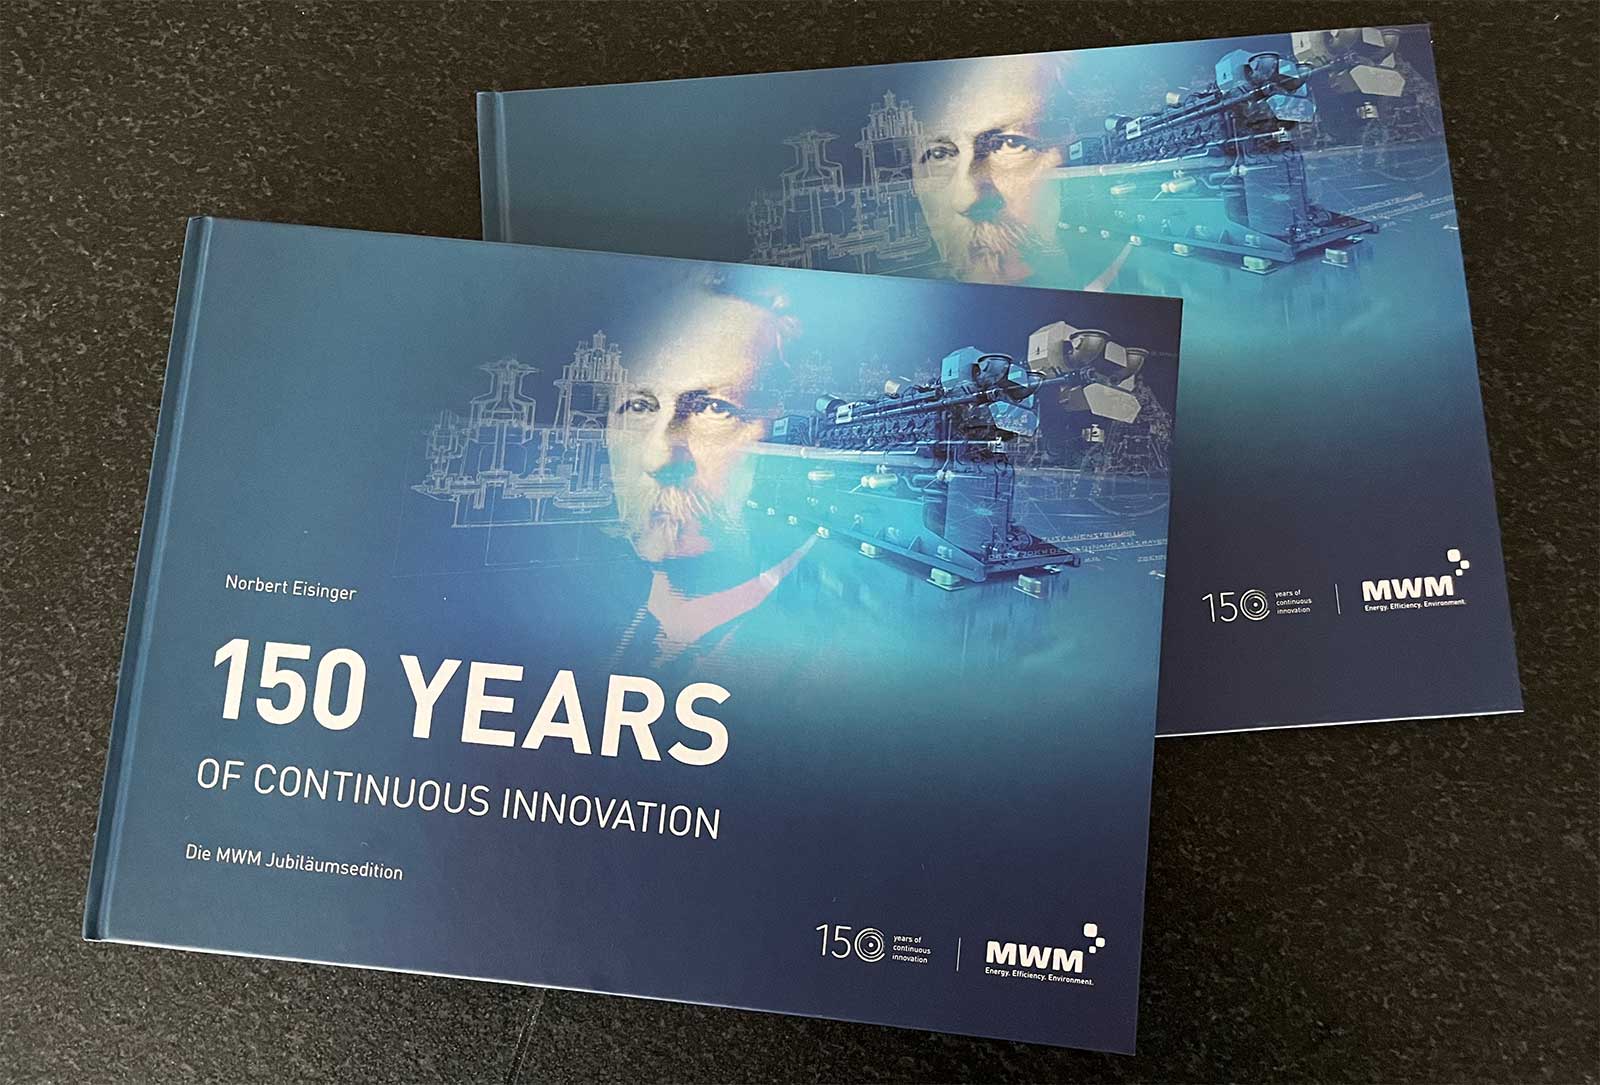 MWM 150 years of continuous innovation